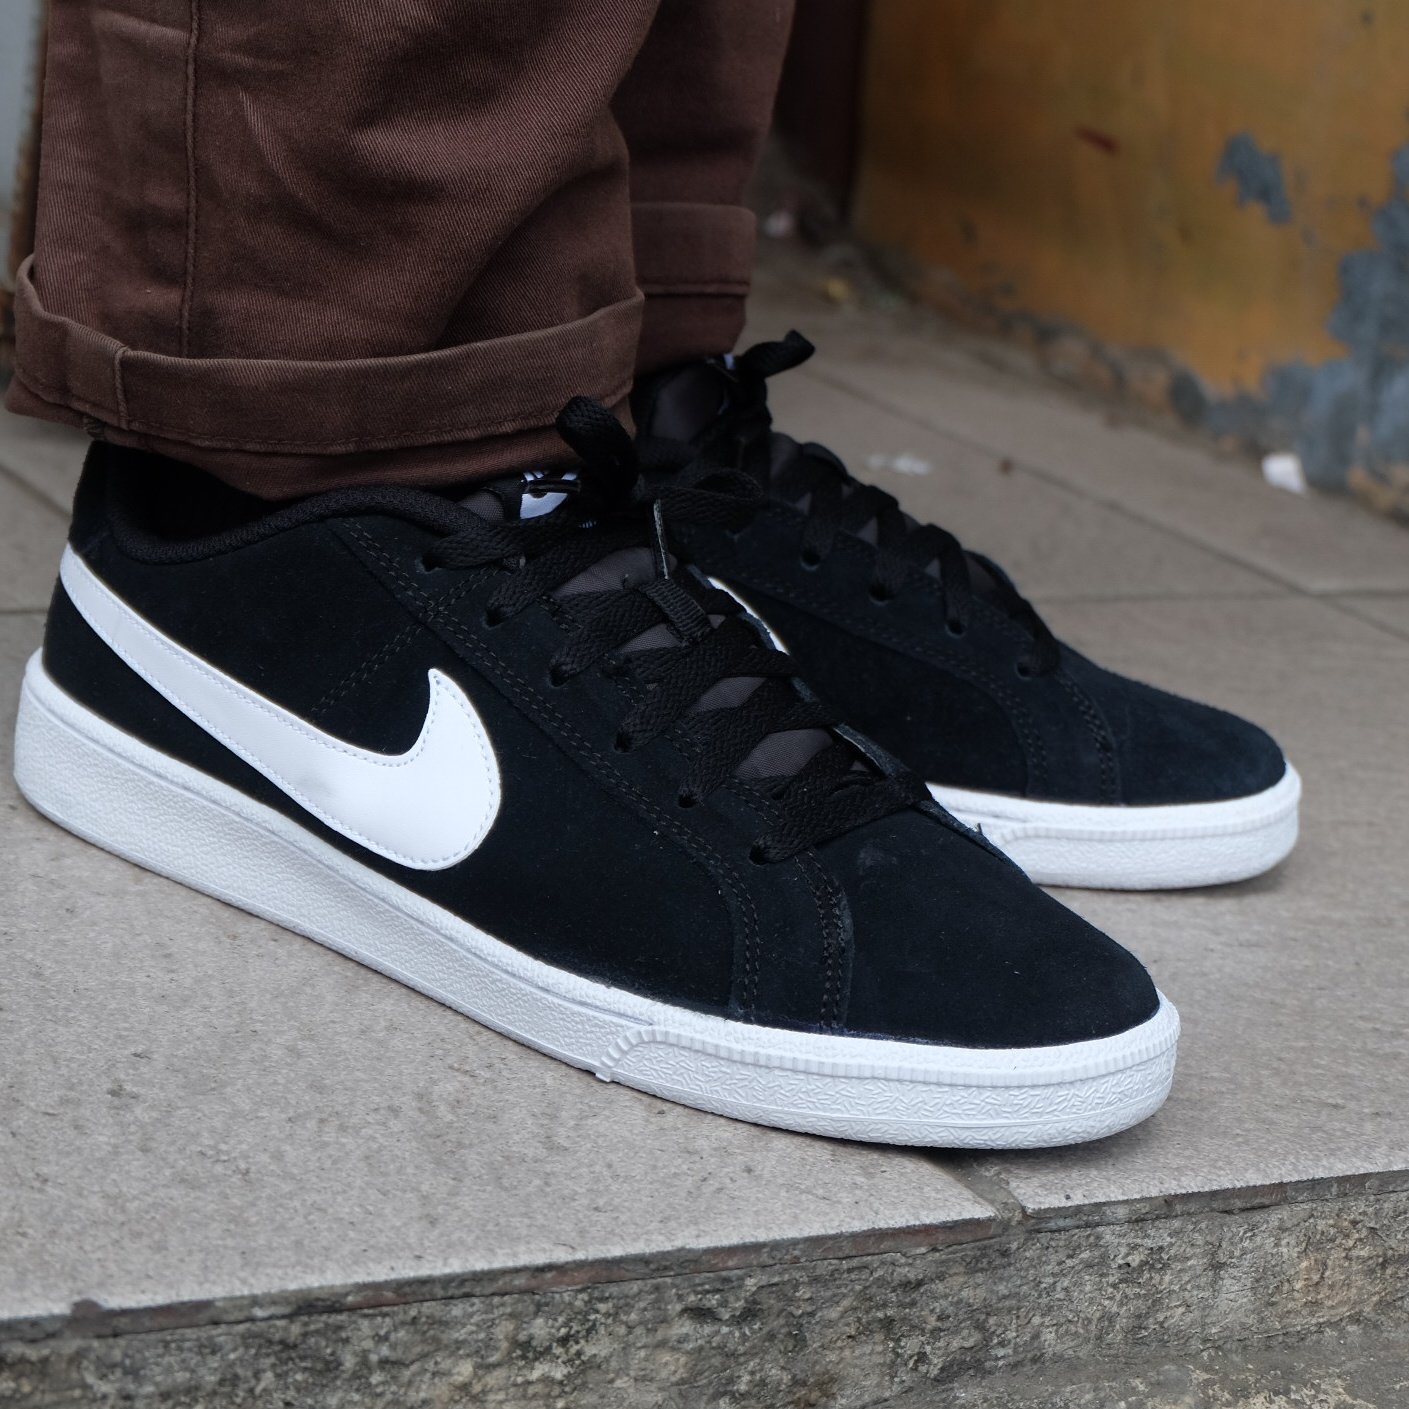 Día del Maestro extraer perfume Pegashoes Bandung on Twitter: "NIKE COURT ROYALE (SUEDE BLACK WHITE)  ORIGINAL MADE IN INDONESIA BRAND NEW WITH REPLACE BOX  https://t.co/nkVXs1dcMt" / Twitter